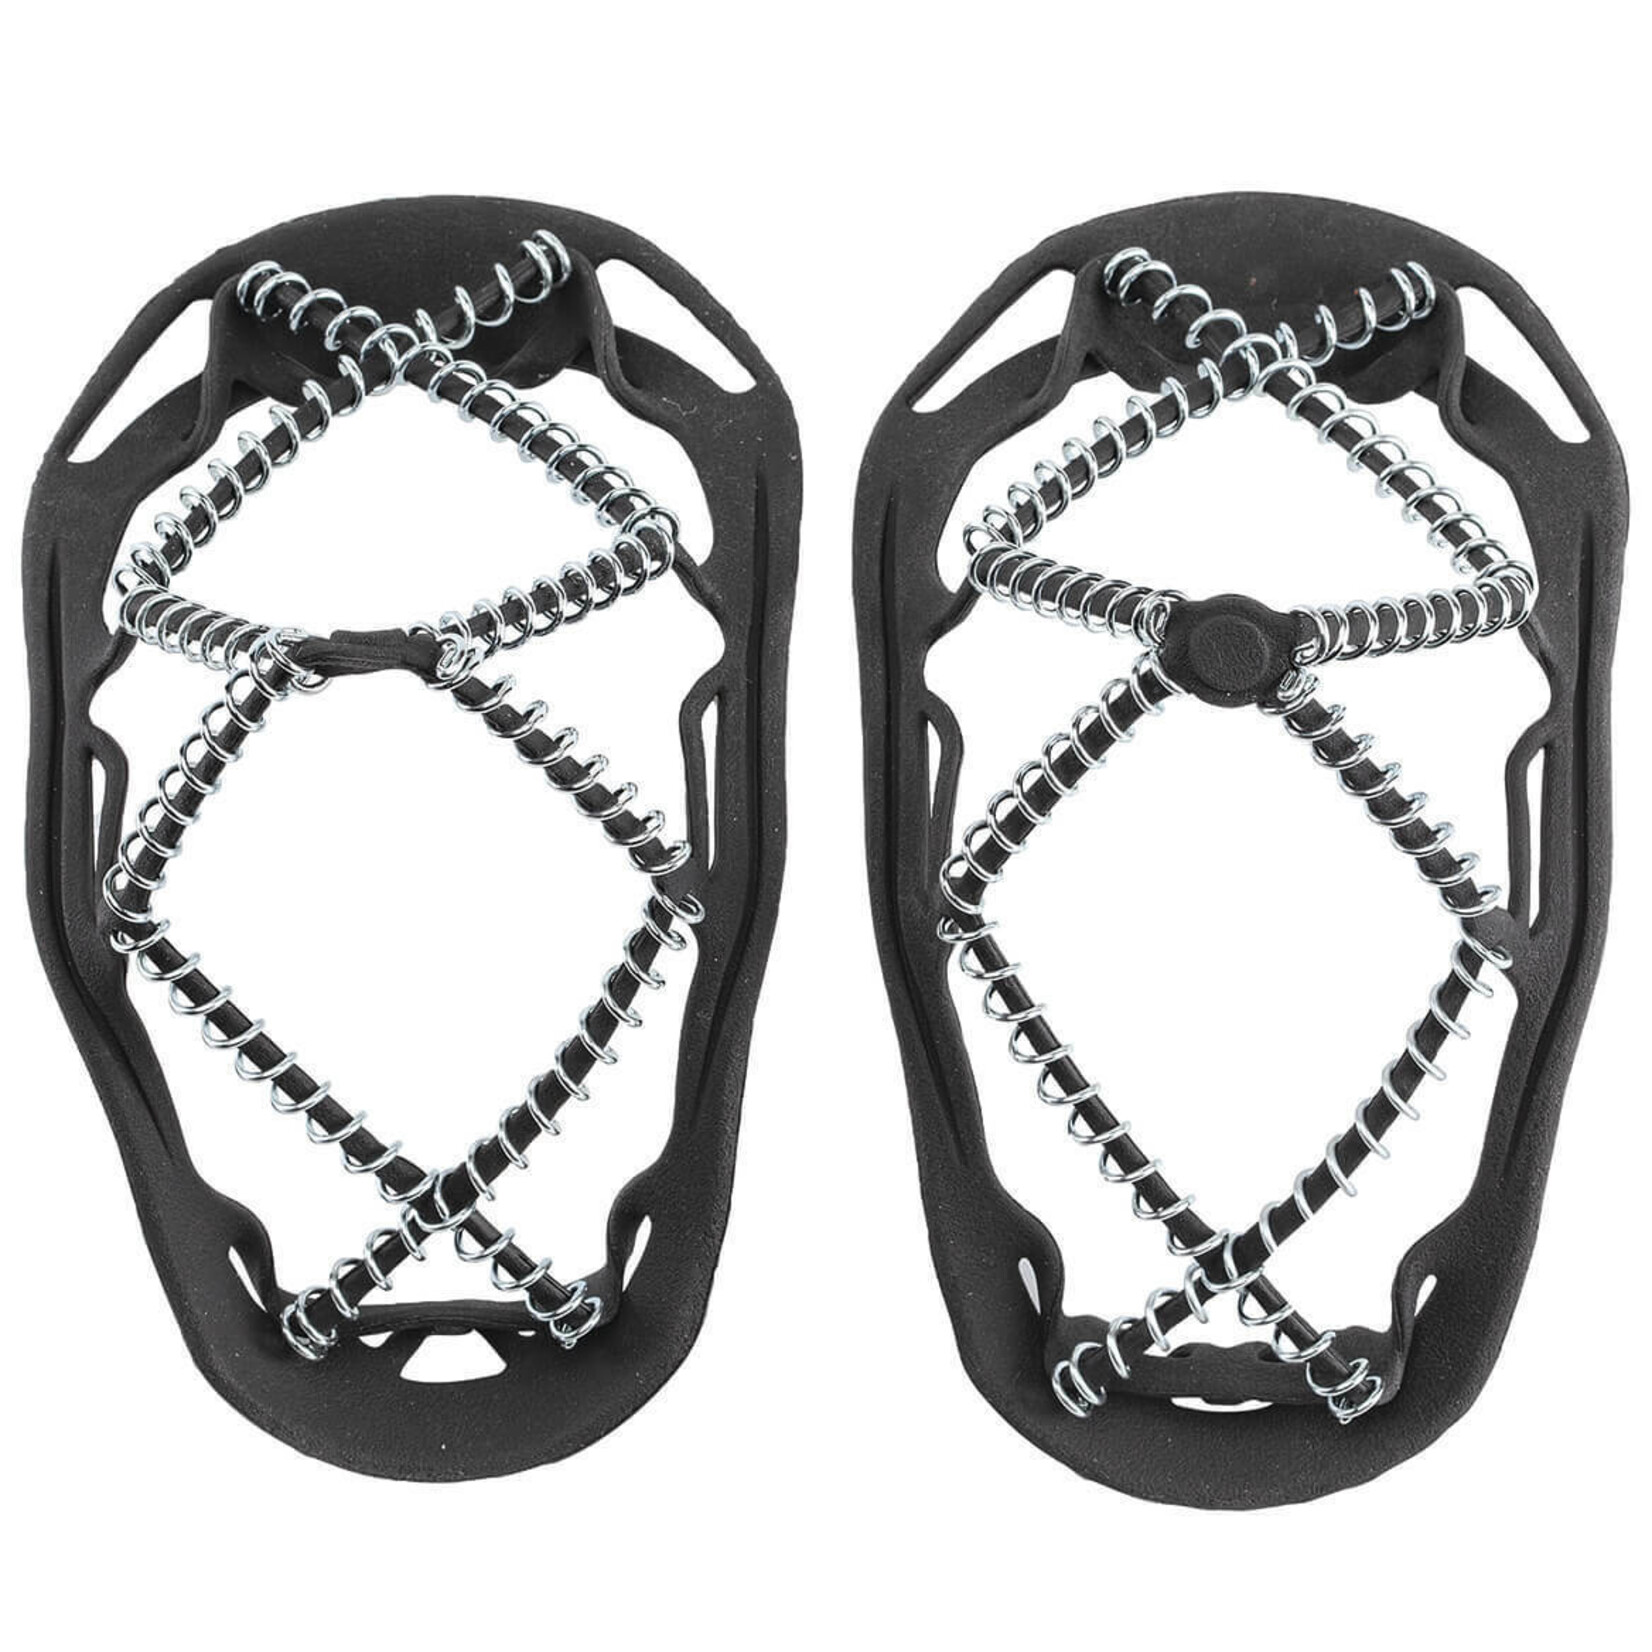 YAKTRAX YAKTRAX Walker Traction Cleats for Snow and Ice, Black